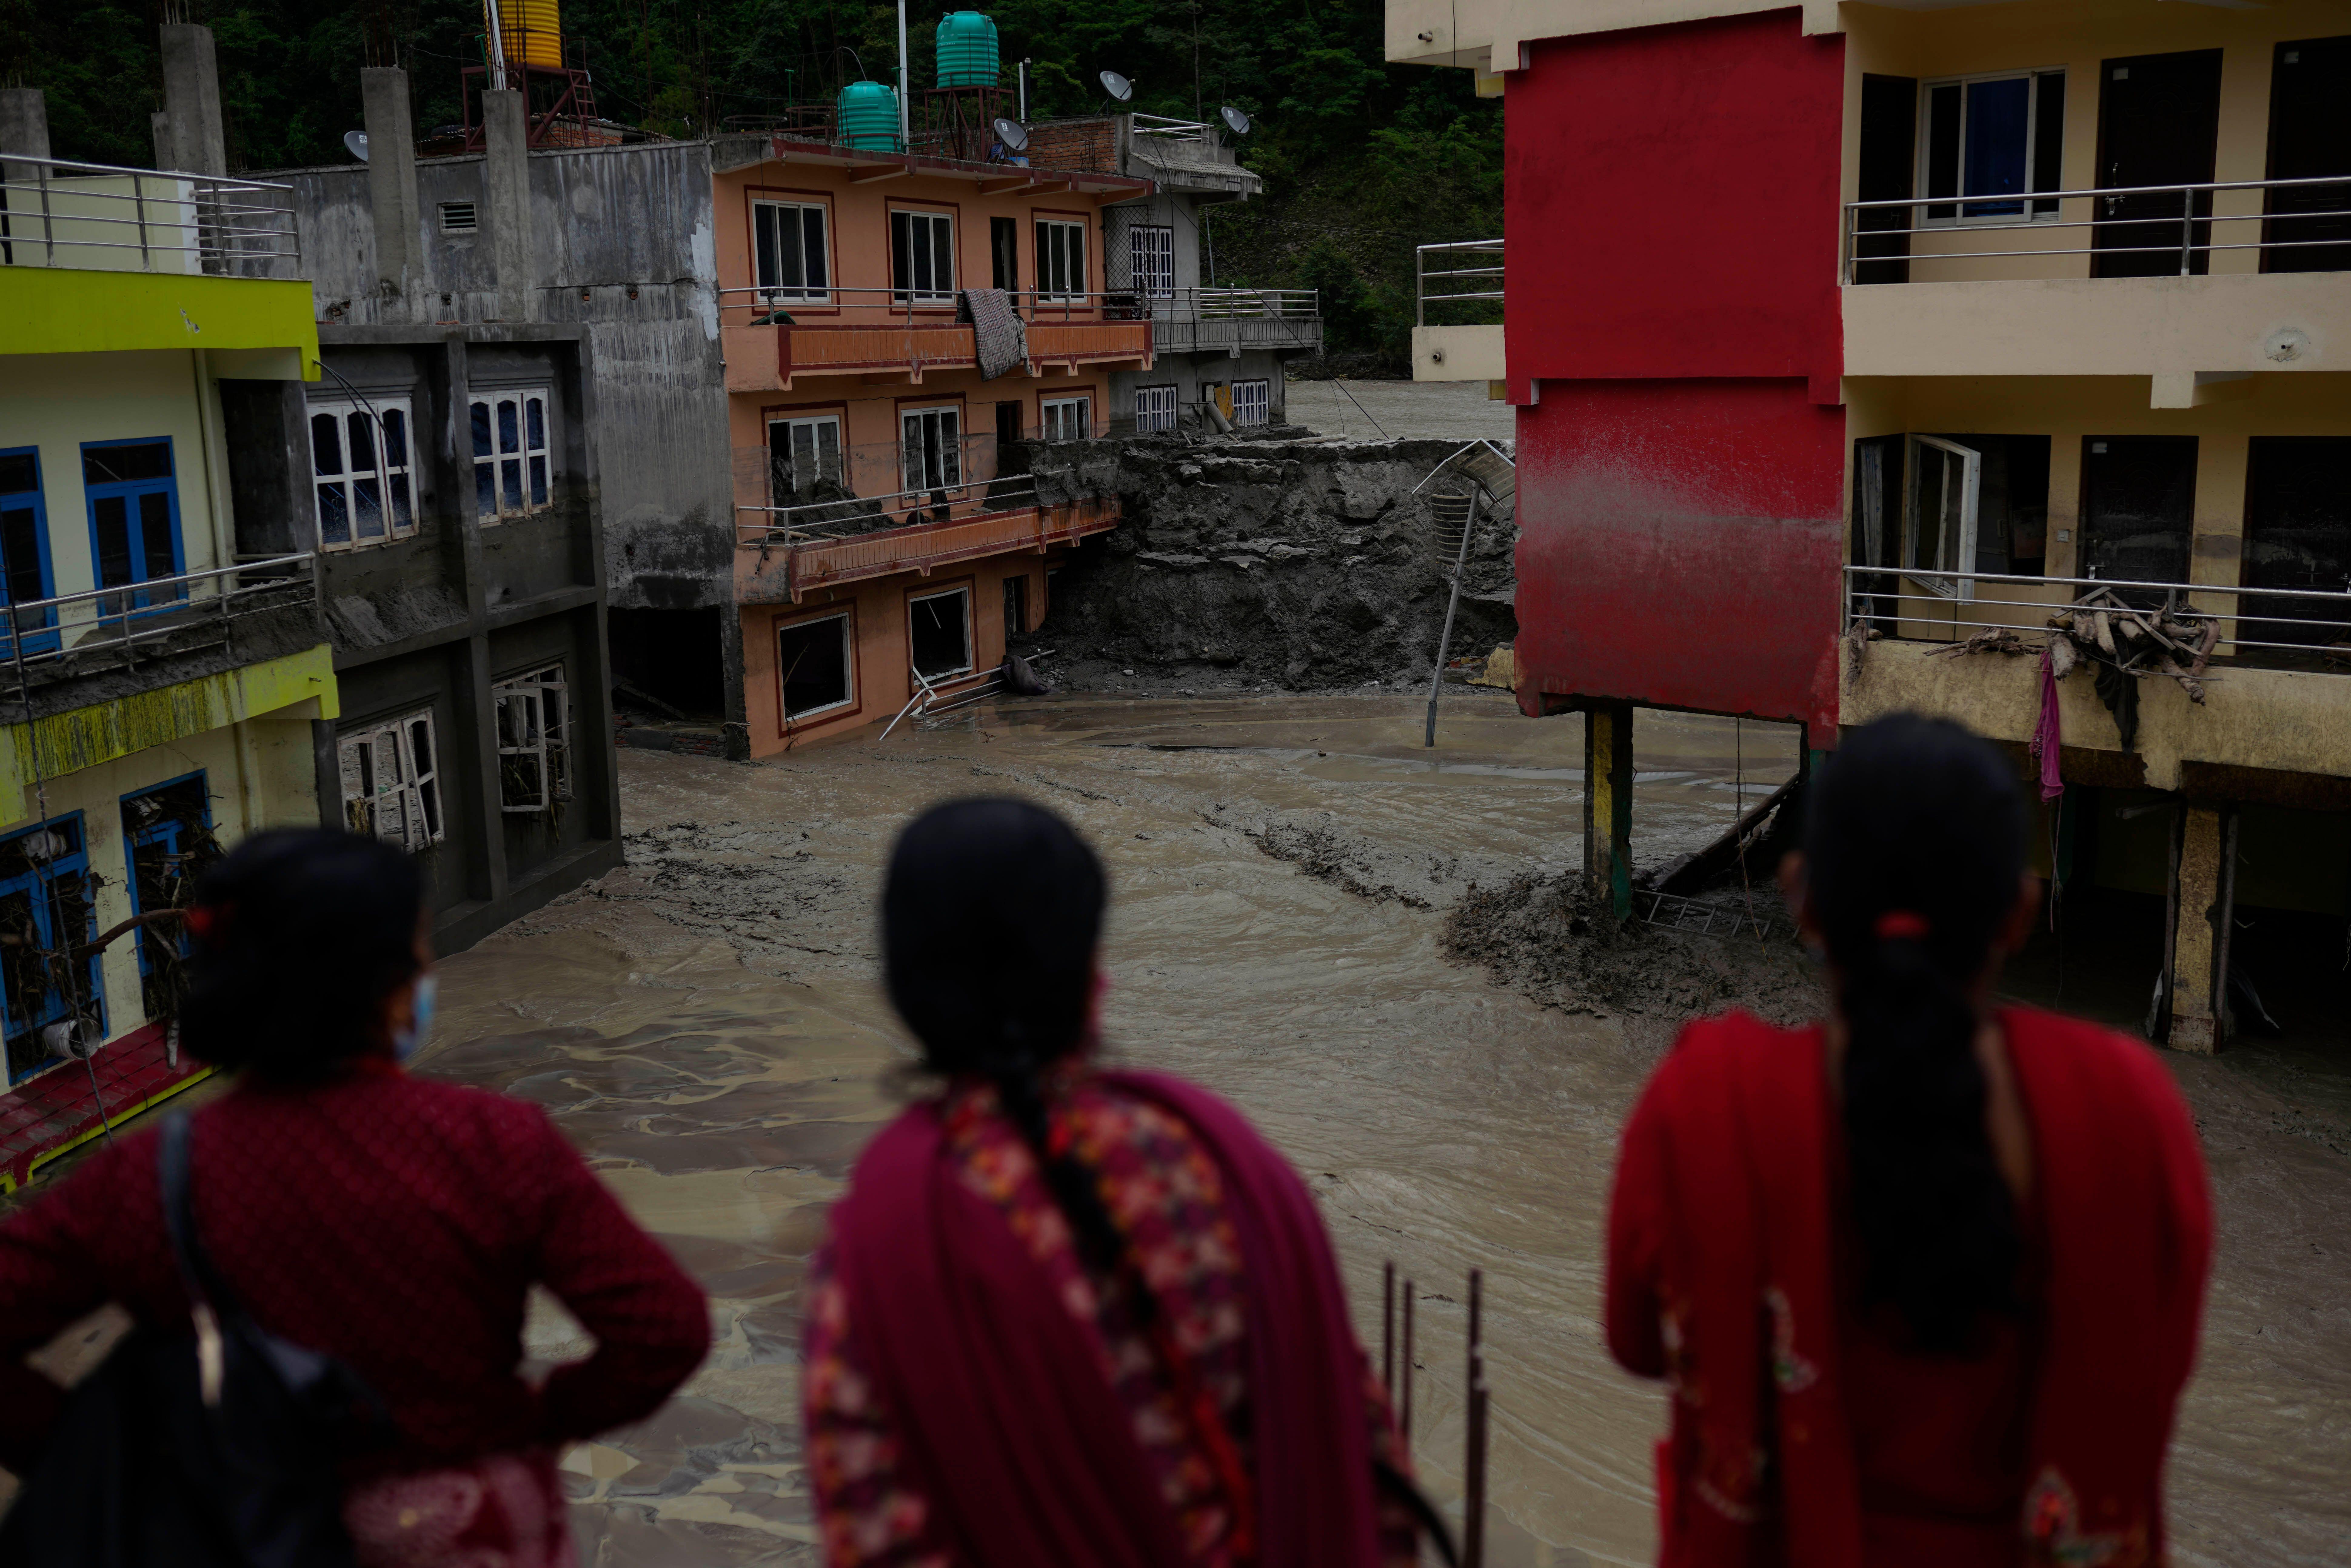 <p>Floodwater from the Melamchi River gushes through houses in Sindhupalchowk district, Nepal. Landslides in the Bhemathang area caused subsequent flooding along the Melamchi River in June 2021. (Image: ZUMA Press, Inc / Alamy)</p>